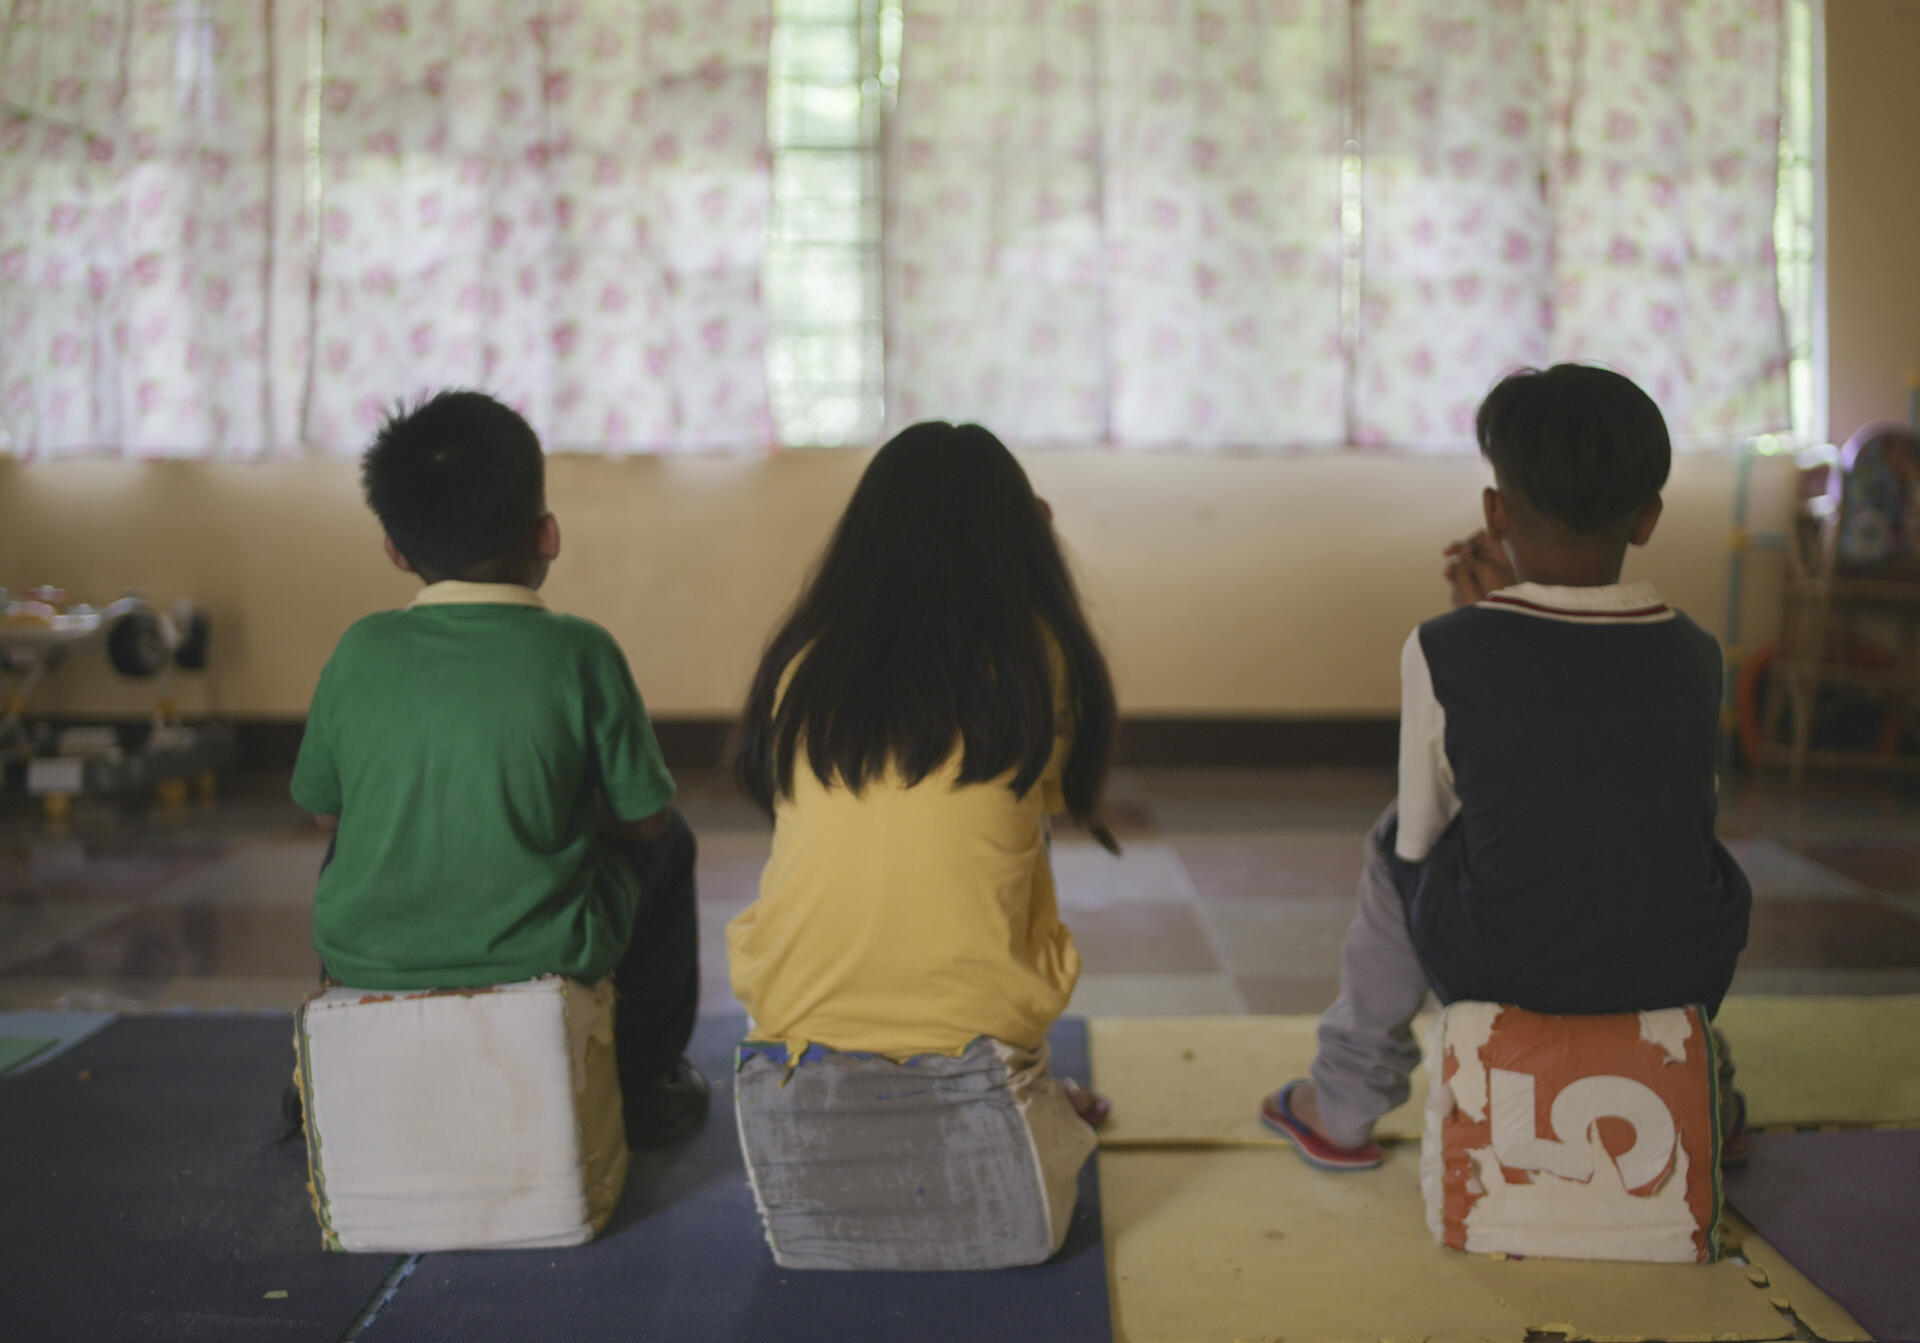 Diwa, center, surrounded by her little cousin (left) and her adopted brother (right).  They testify about the rapes they suffered, in the playroom of the Preda Foundation that took them in, in the Olongapo region, Philippines, on December 10, 2022.